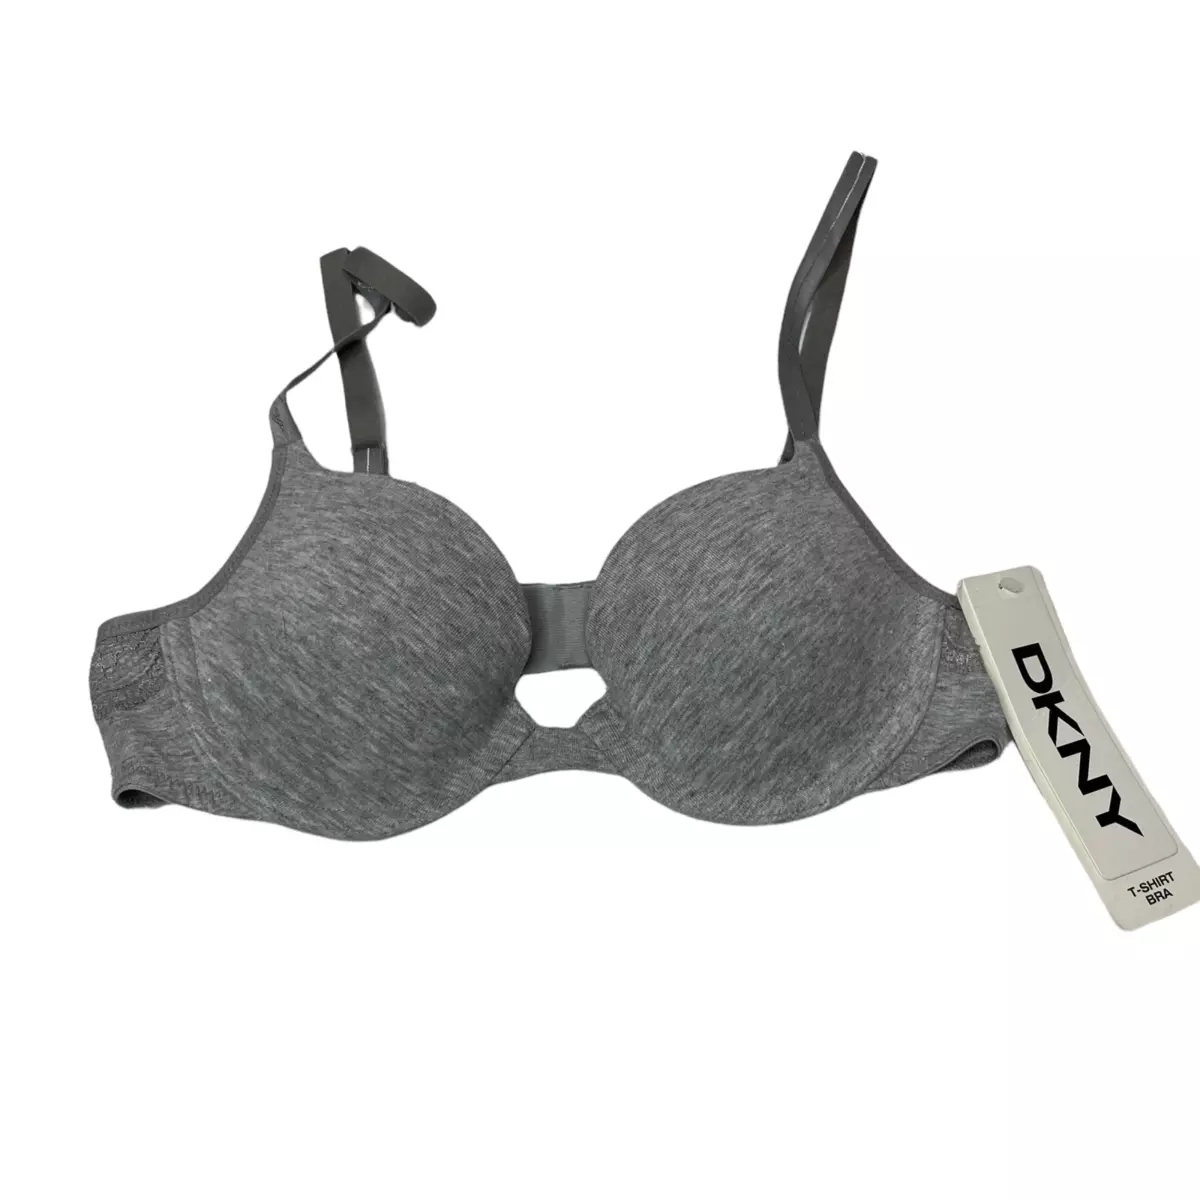 DKNY 458270 Women's Downtown Cotton Lace Push-Up Bra Gray 32A $42.00 New